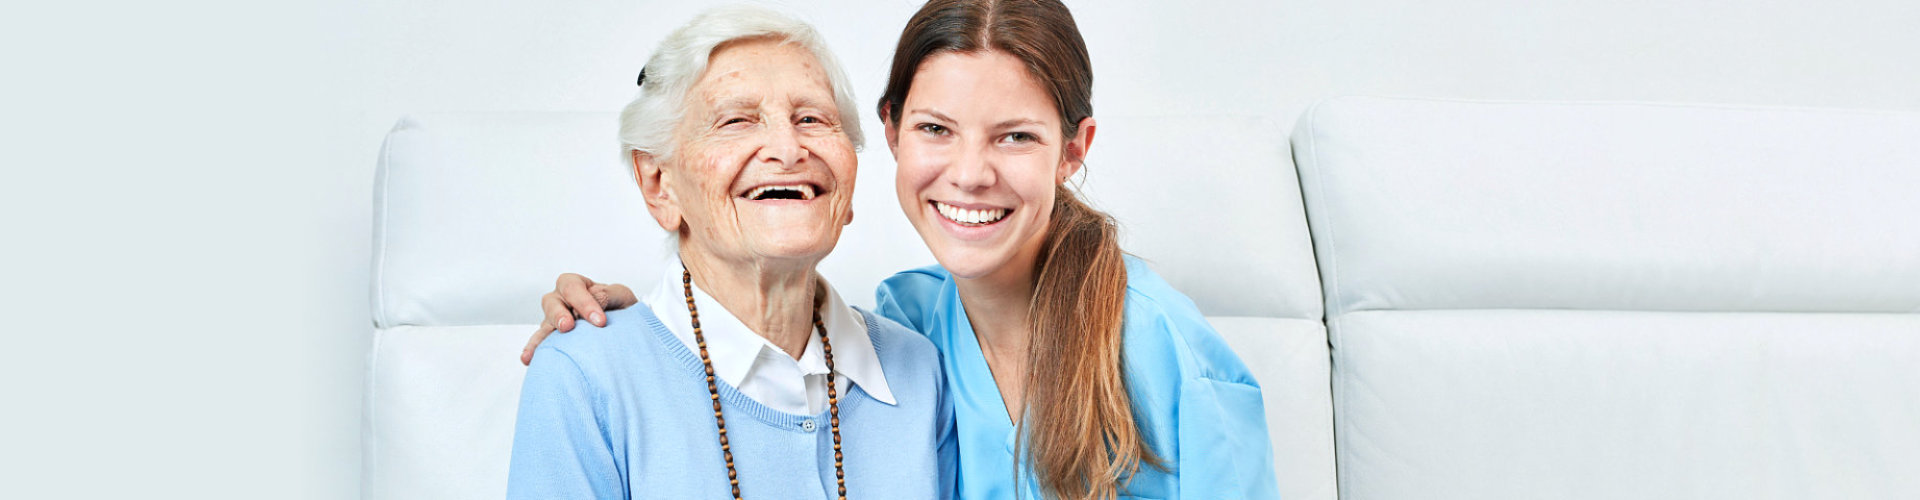 young nurse and old woman smiling